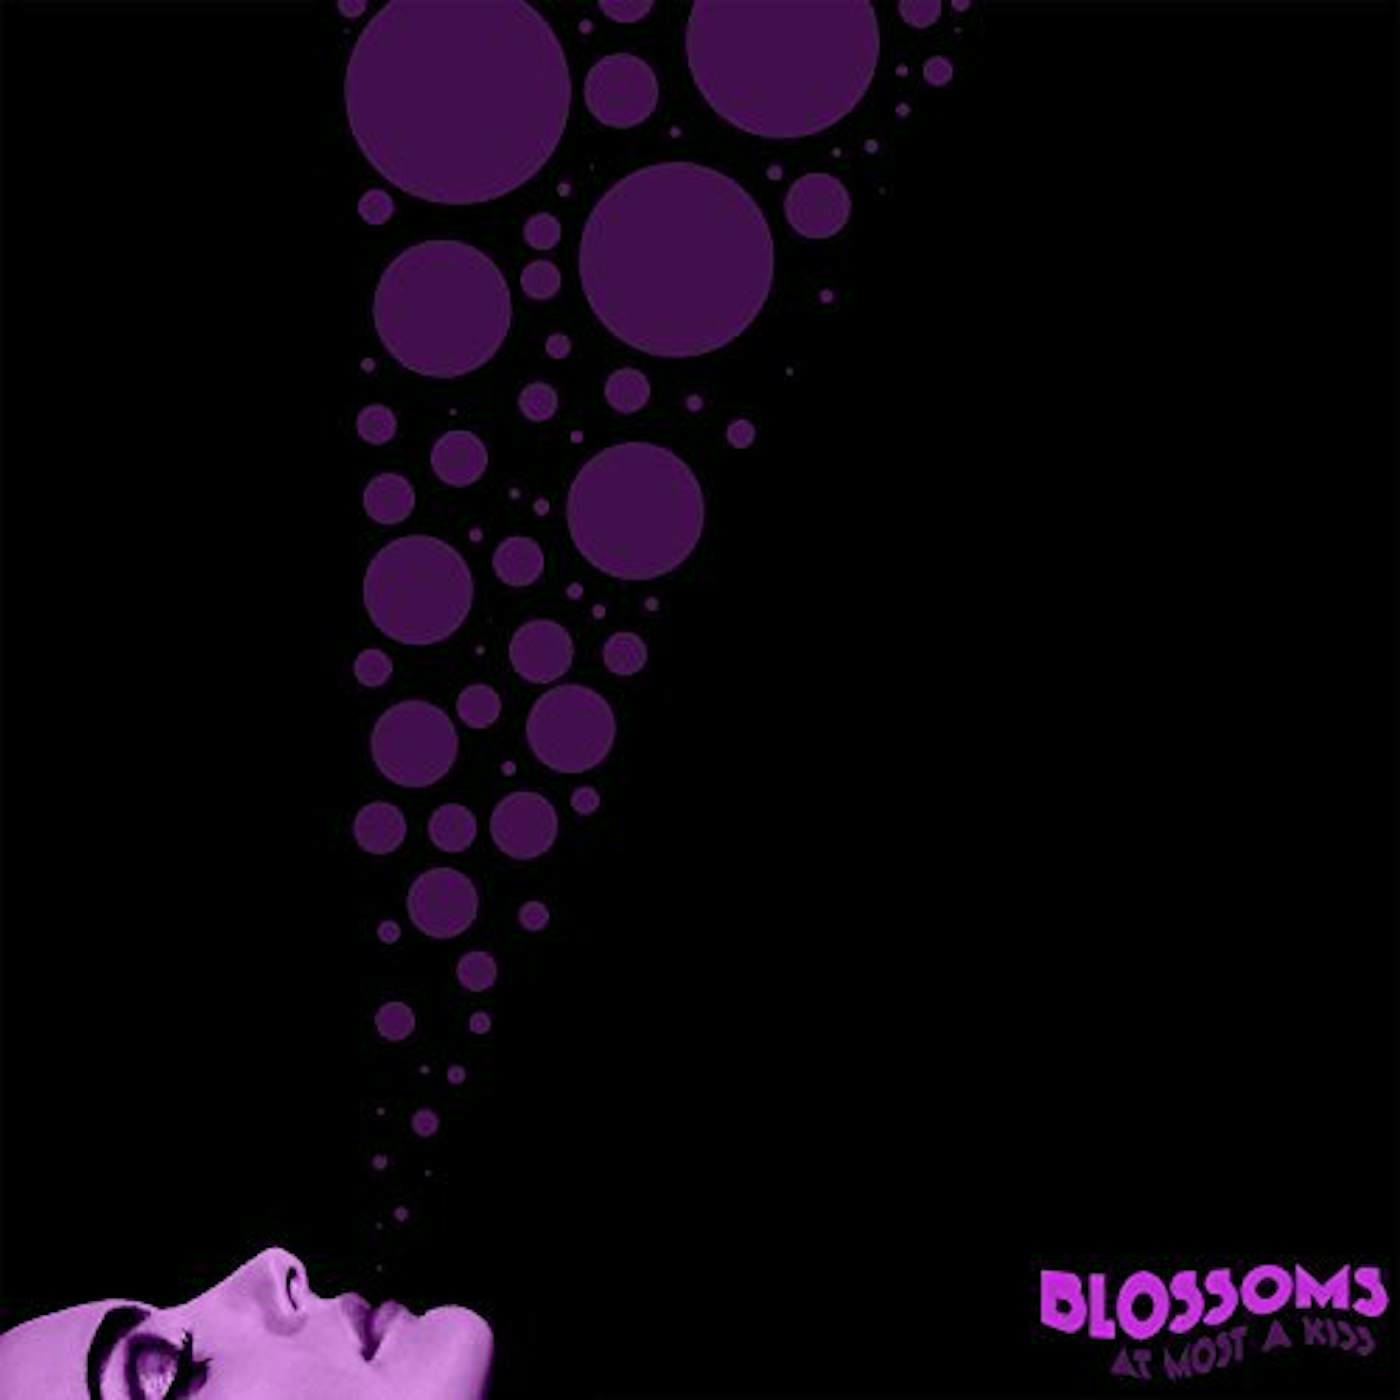 Blossoms AT MOST A KISS Vinyl Record - 10 Inch Single, UK Release